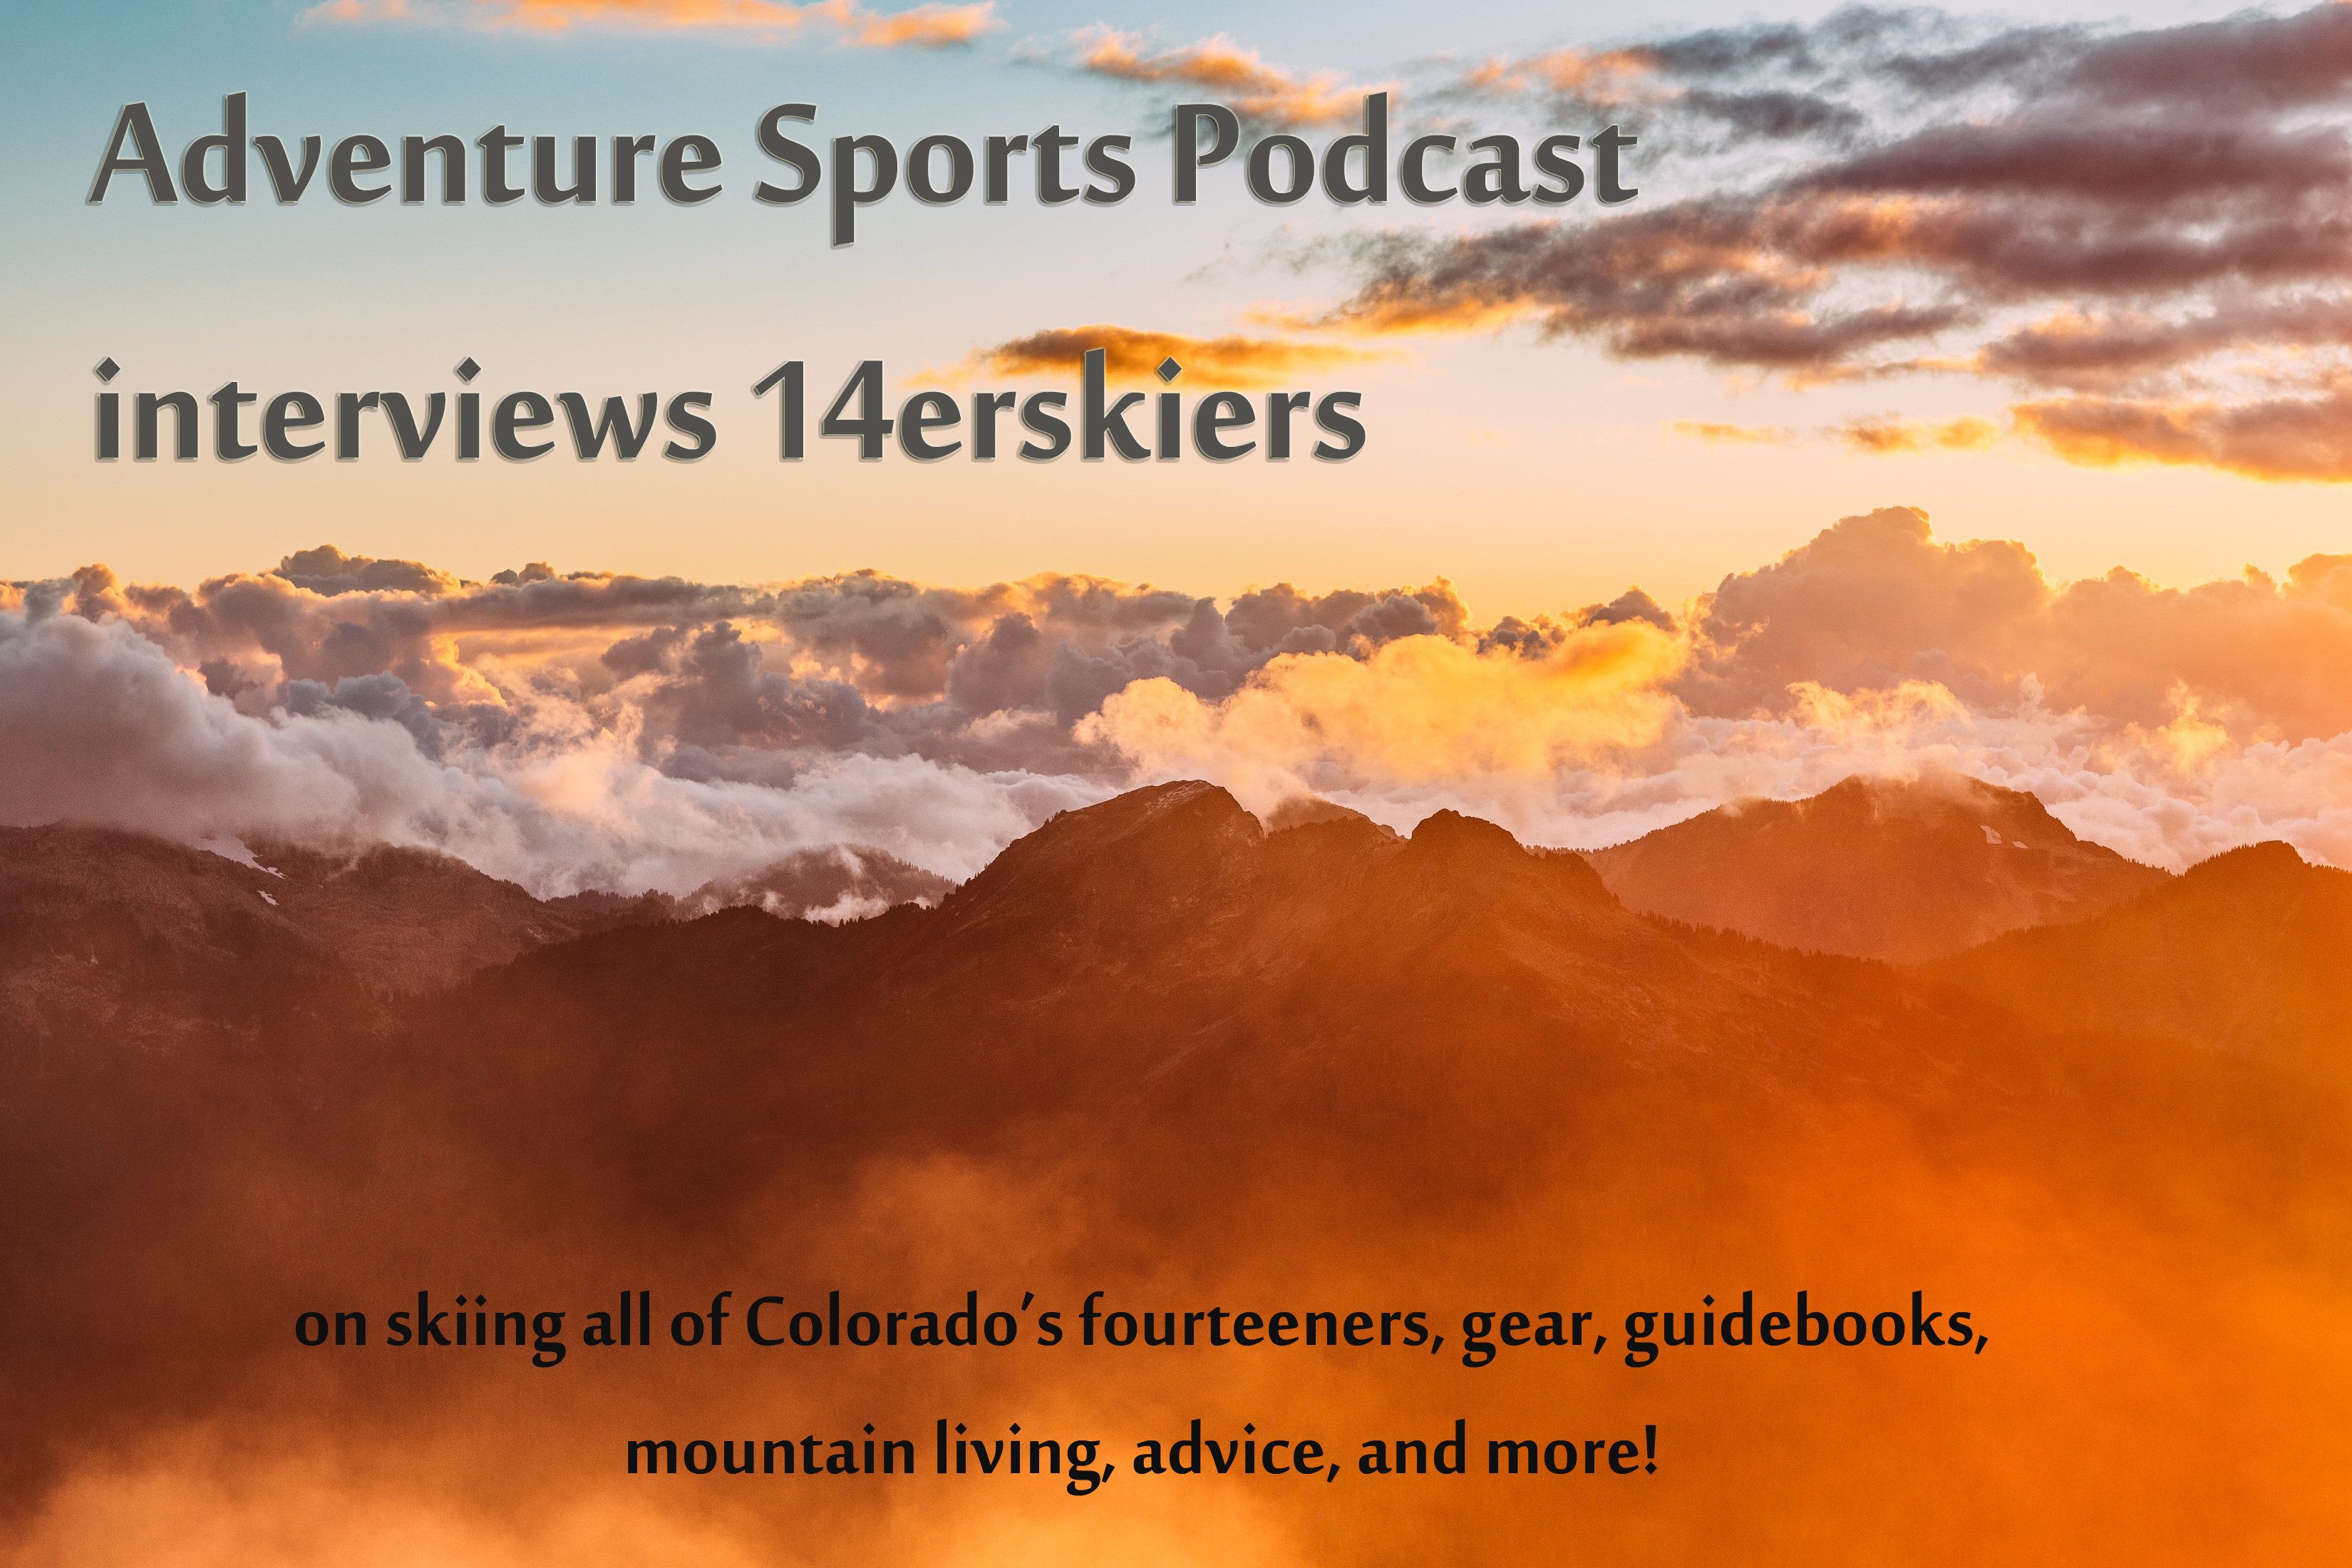 Adventure Sports Podcast Interview with 14erskiers